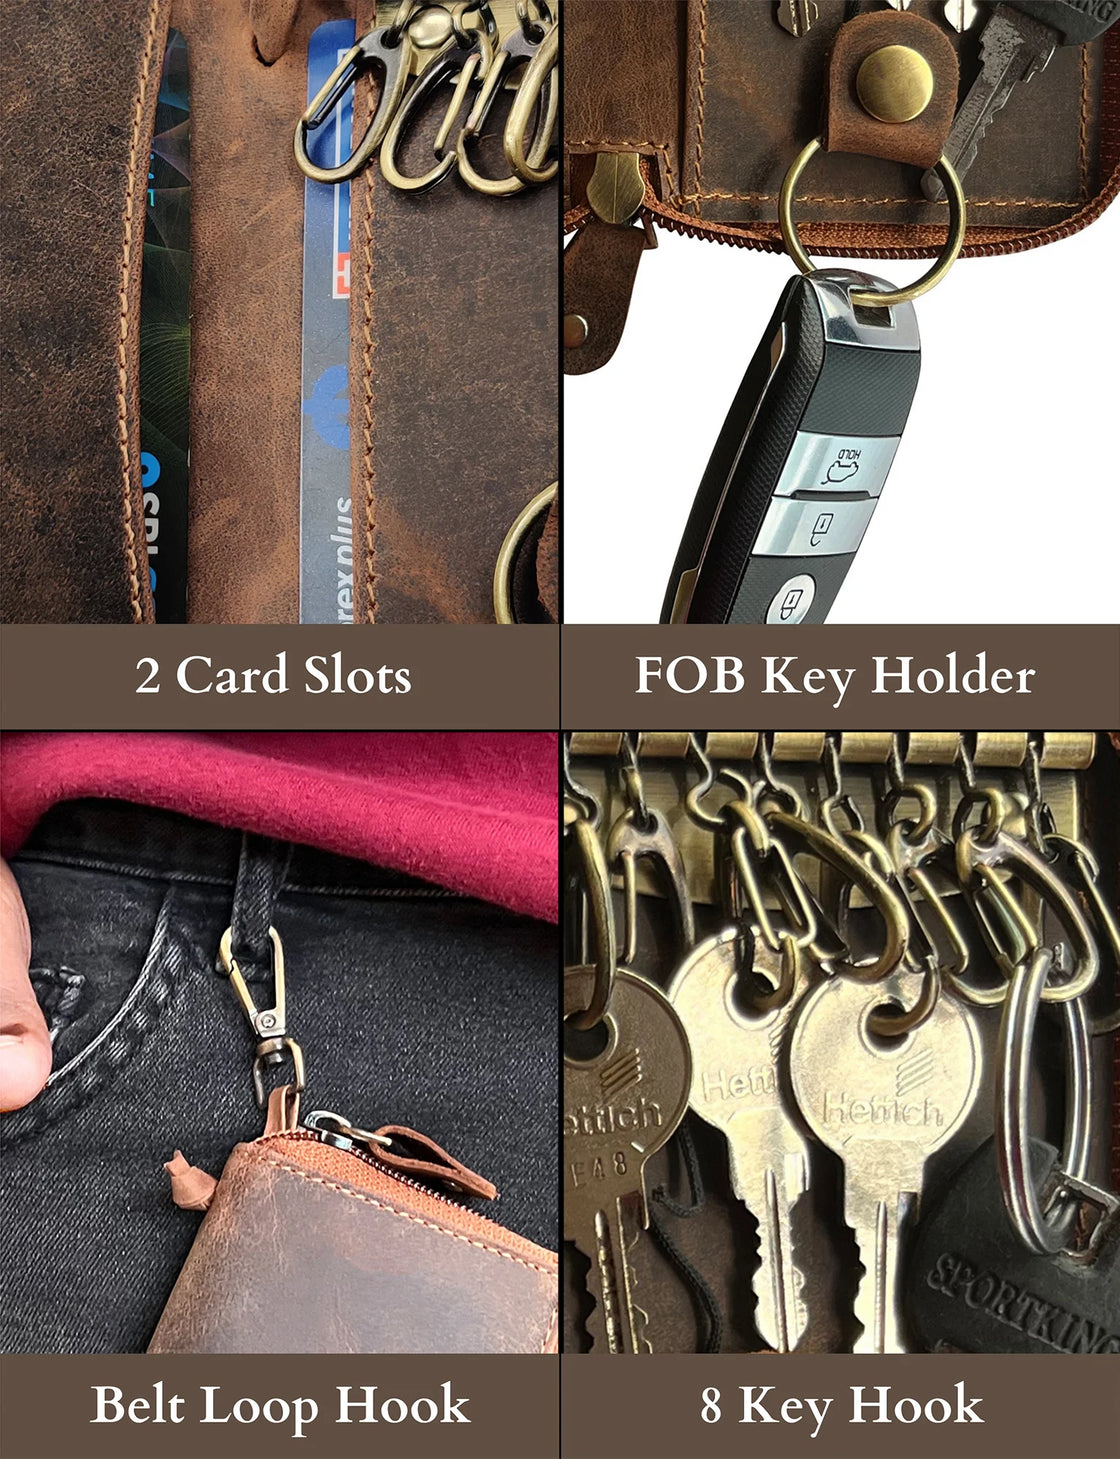 RUSTIC TOWN Leather Key Case Holder - Zippered Key Organizer Wallet with 8  Hooks for Keys, Cash, and Card - Gift for Men and Women (Brown)